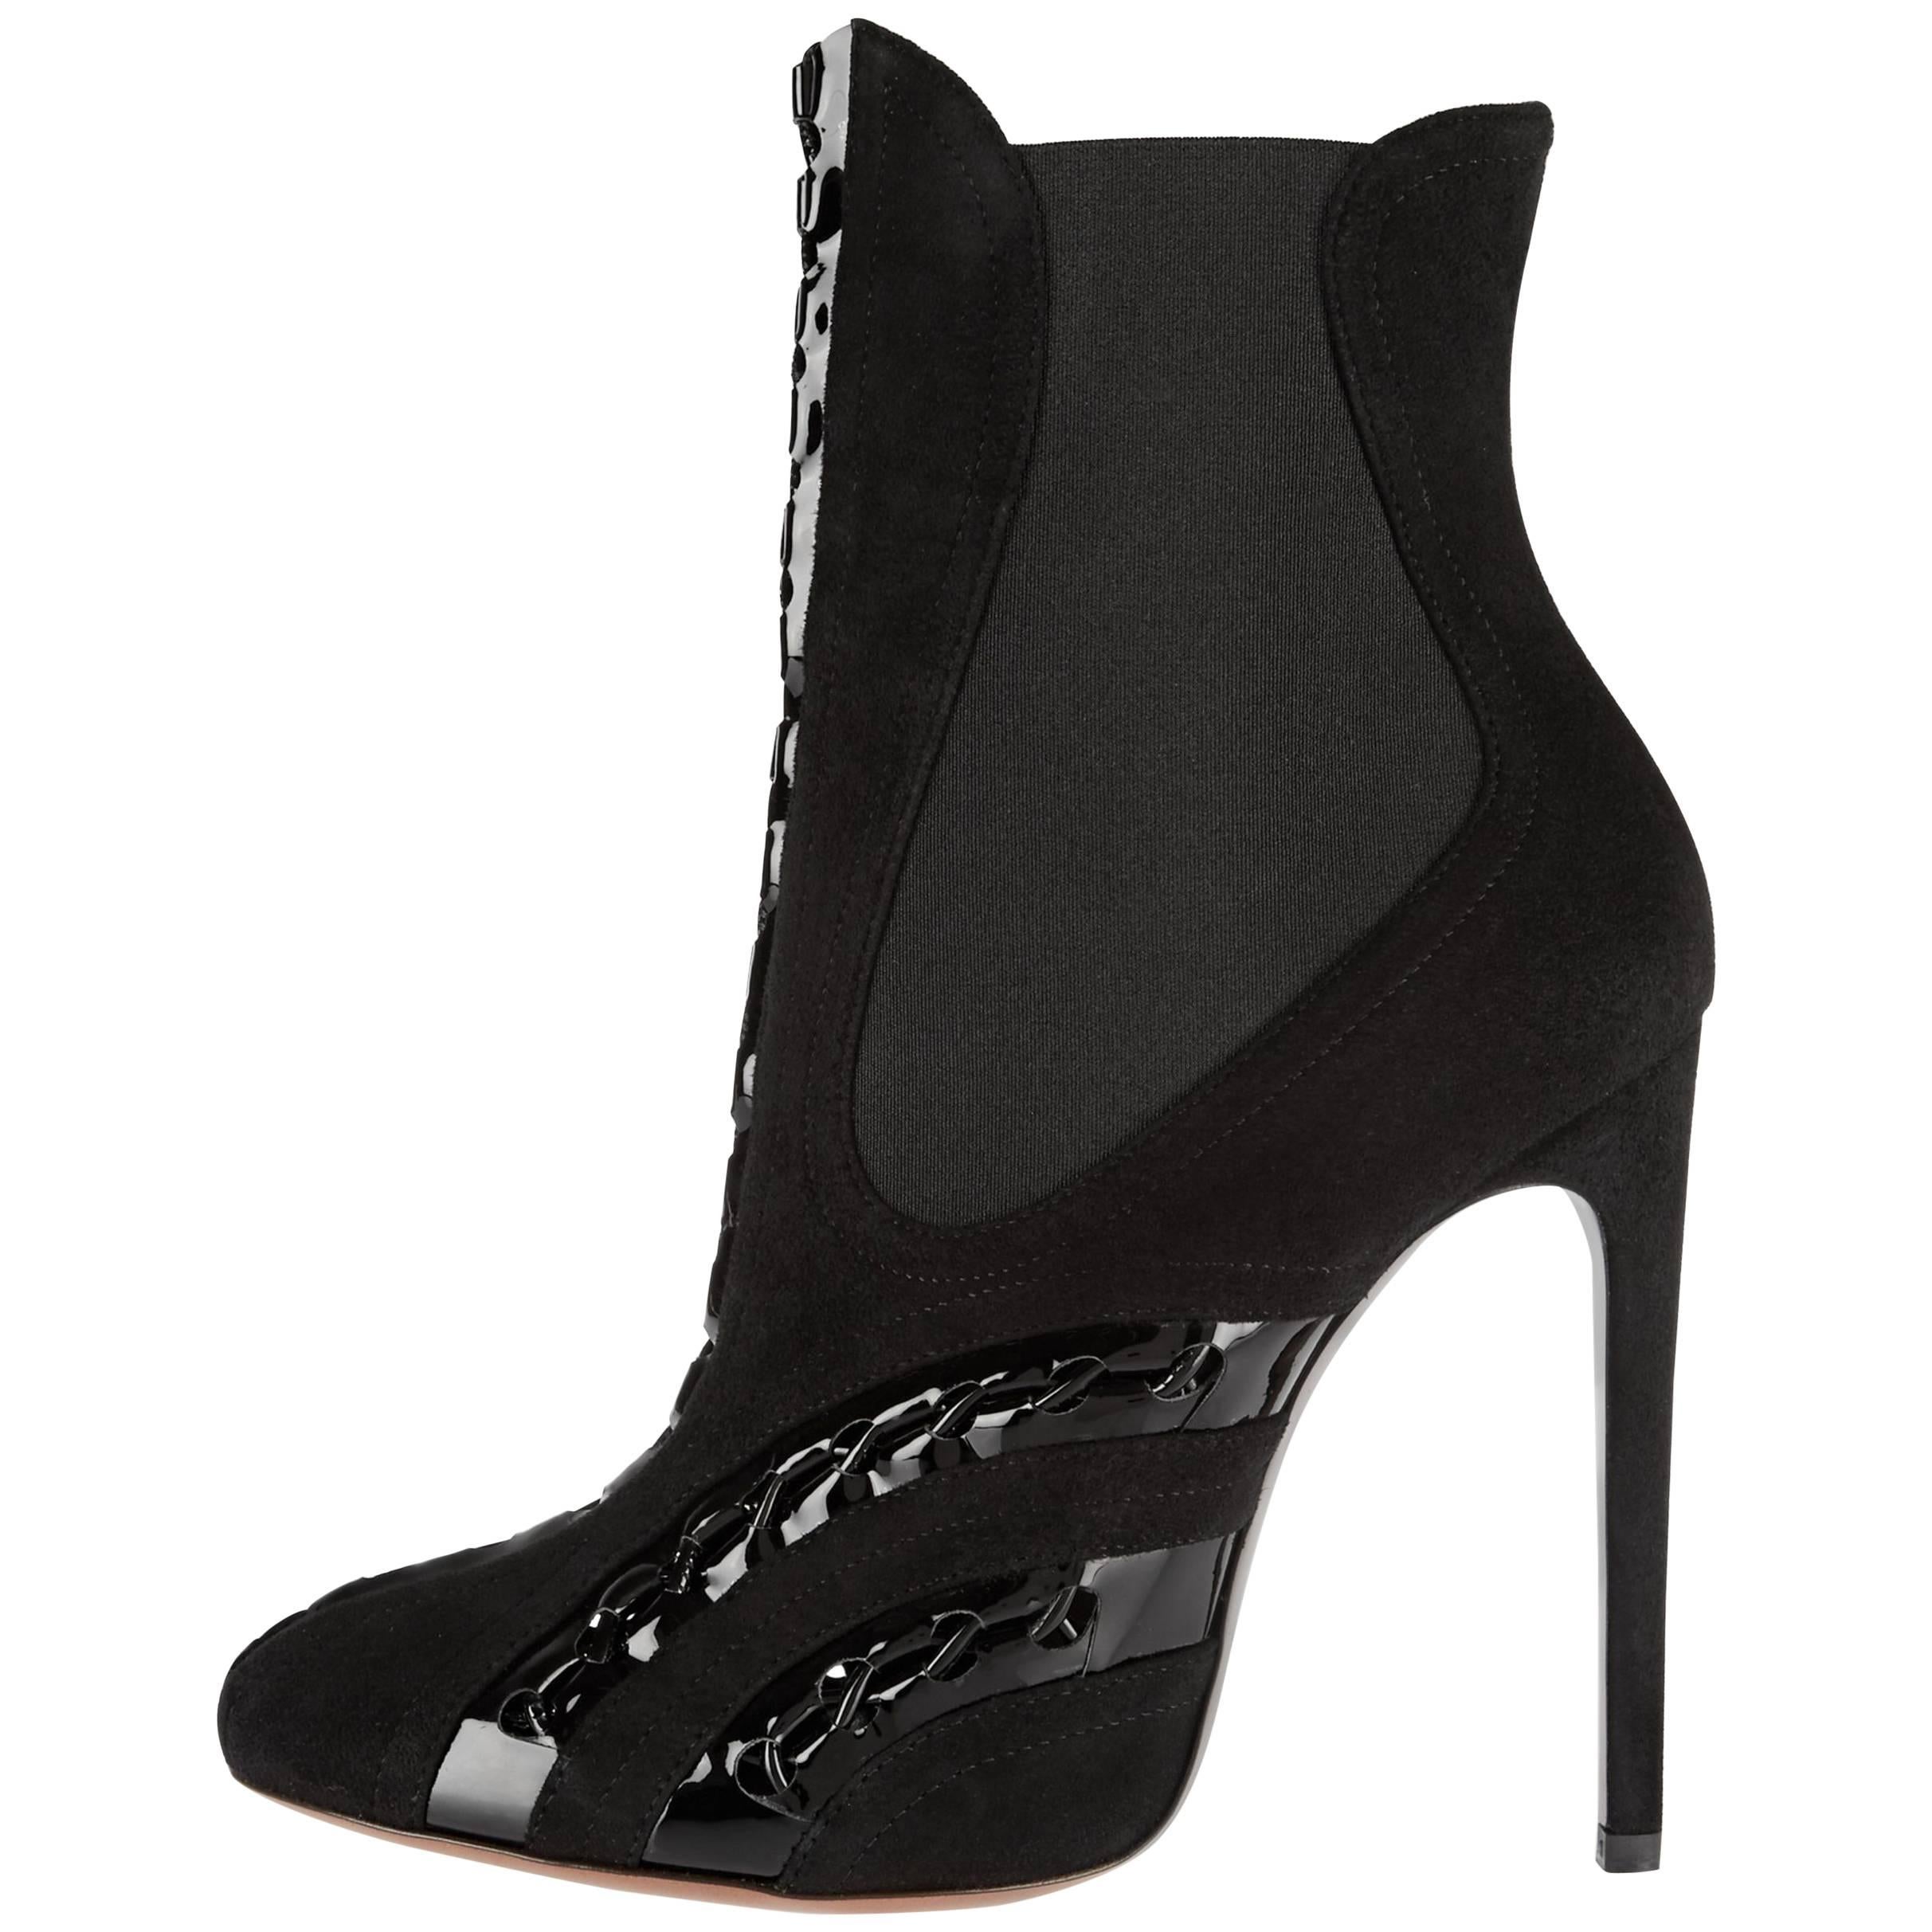 Alaia New Black Suede Patent Leather Ankle Boots Booties in Box